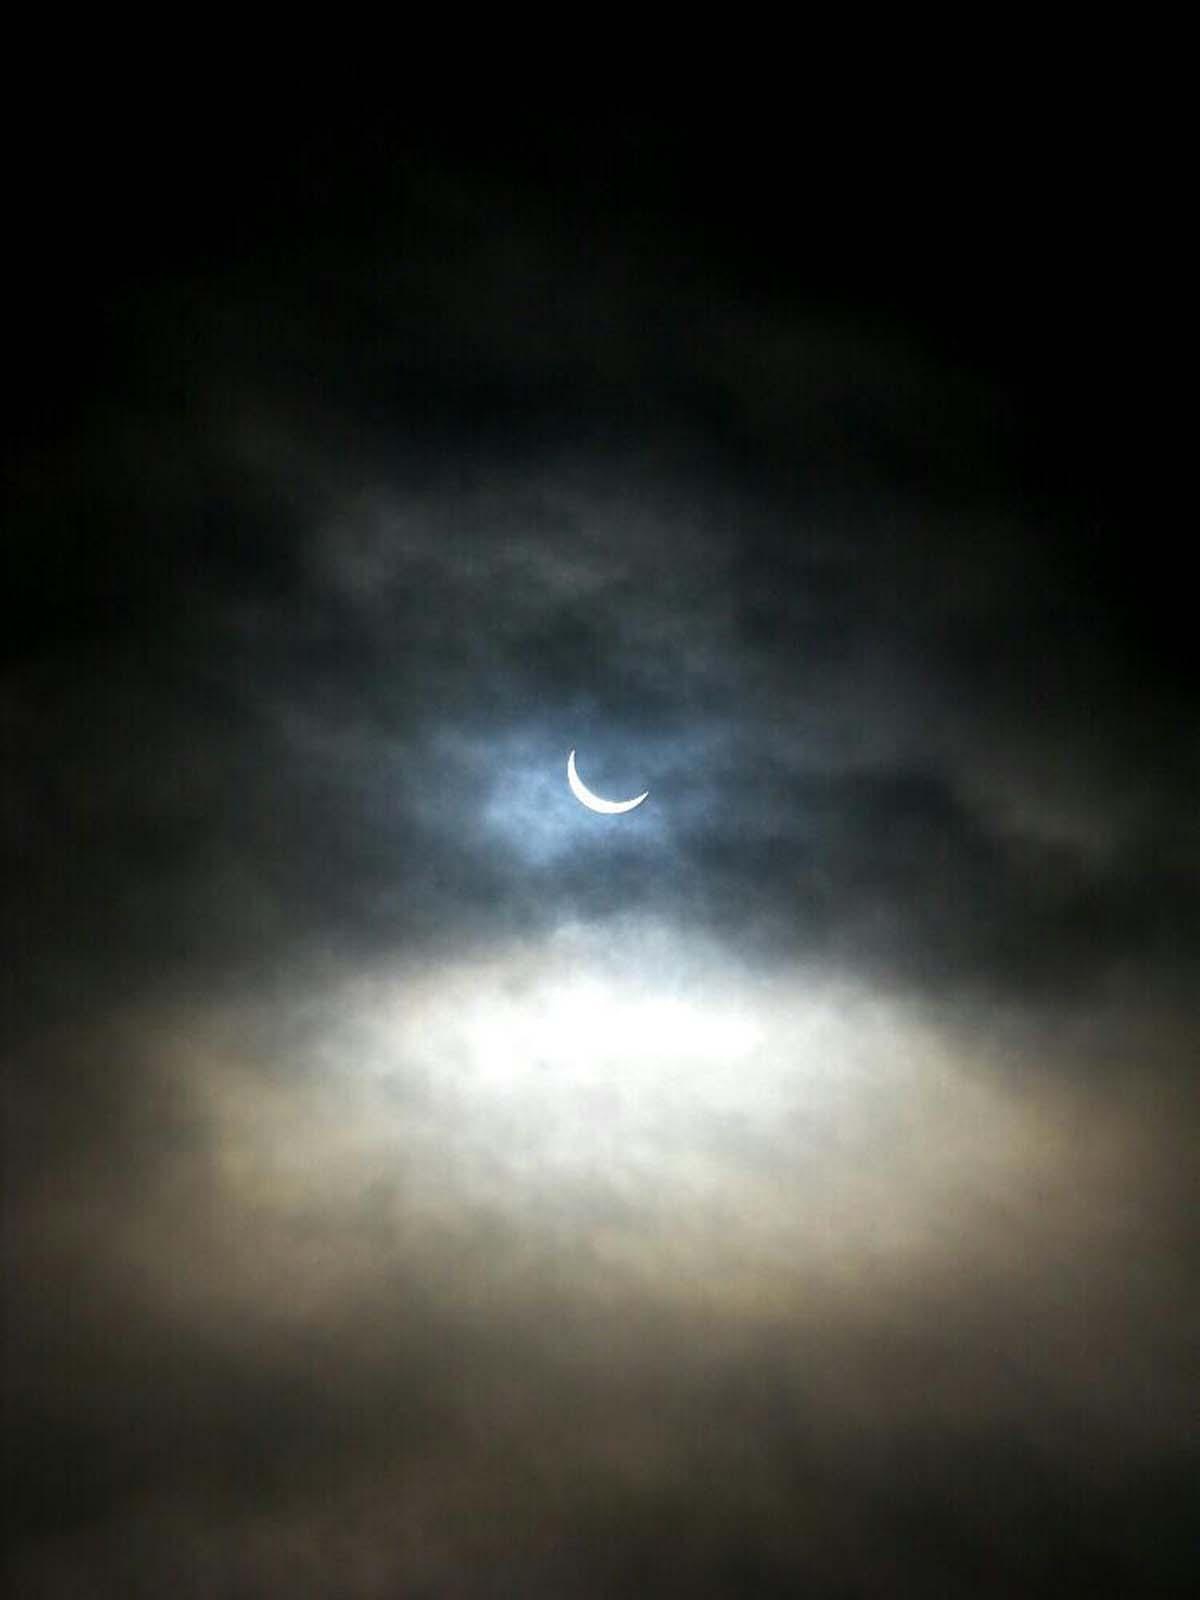 The Birkenhead Park team sent in this image of the eclipse over the park